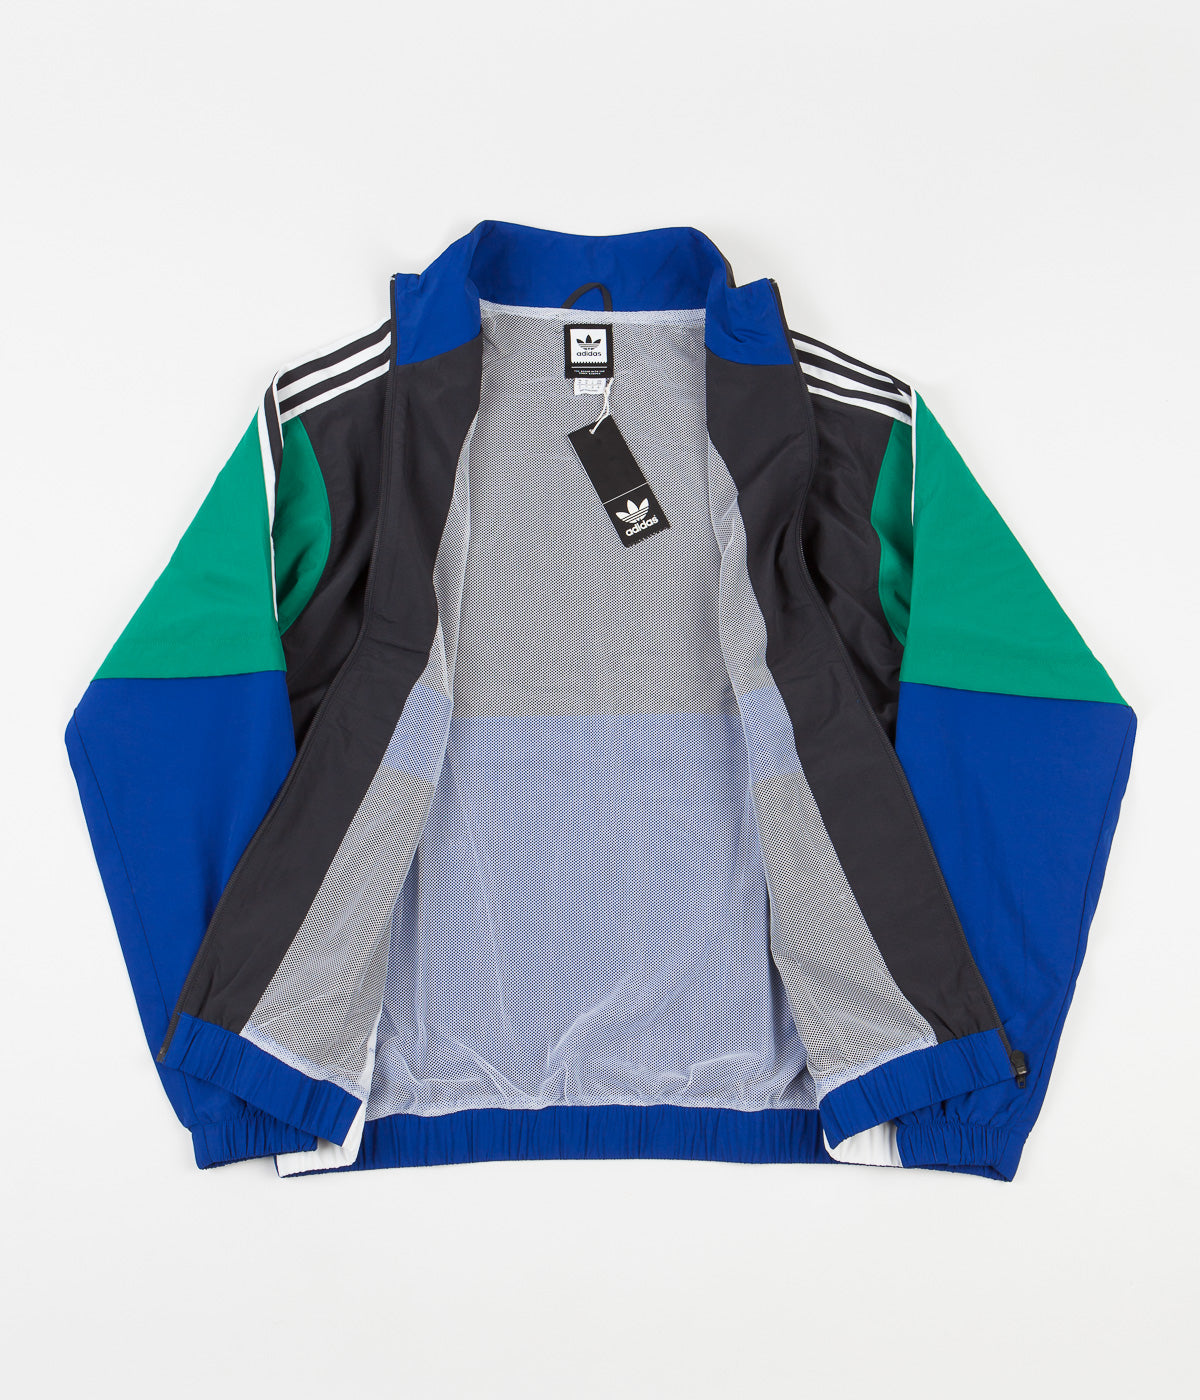 adidas green and blue